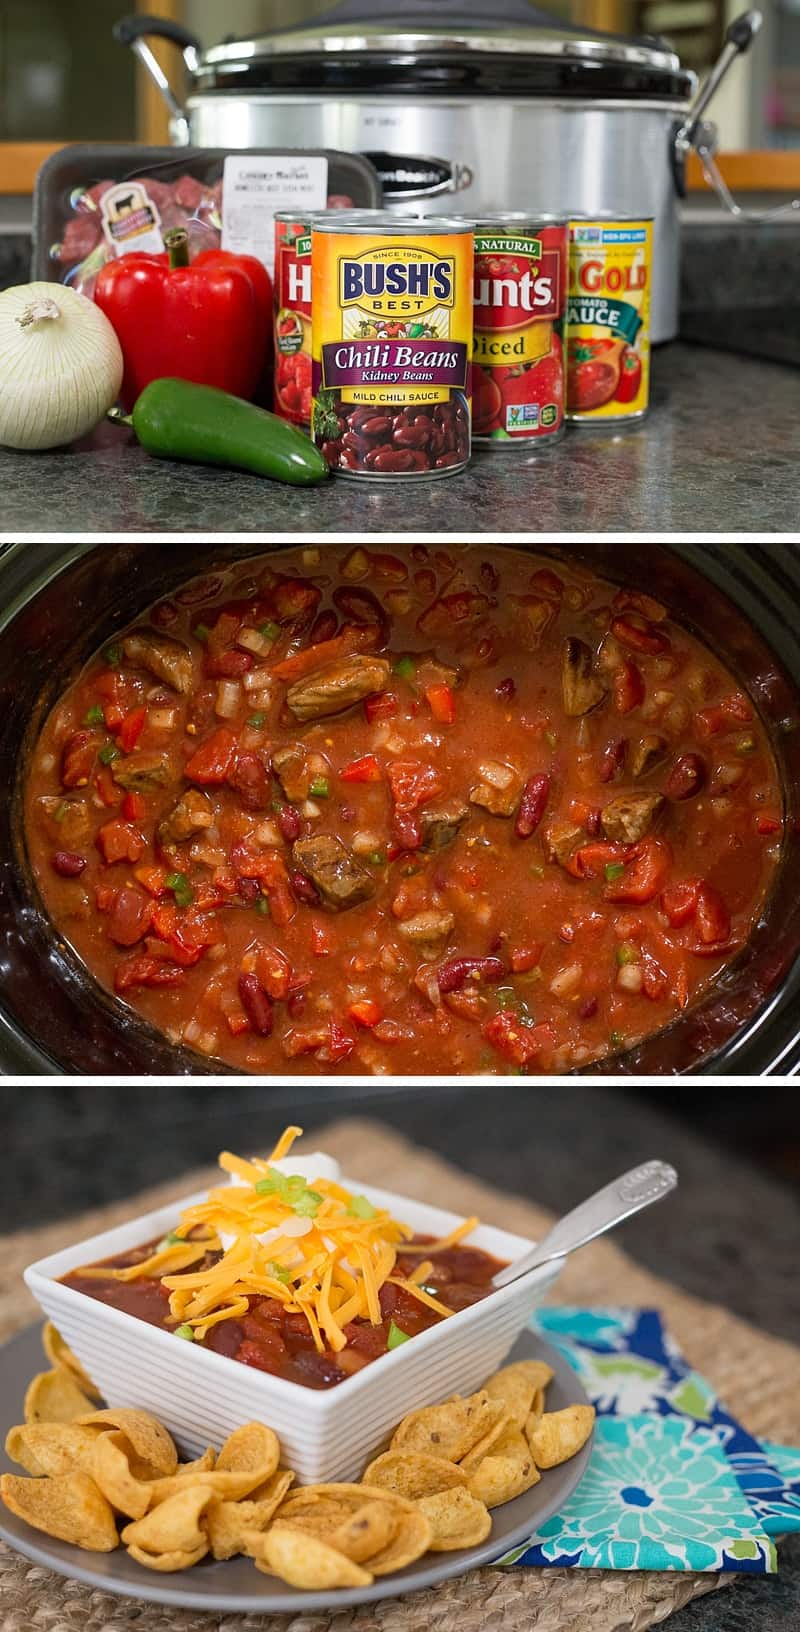 Best chili EVER! This slow cooker recipe is so SIMPLE to make. You can use ground beef, steak or go vegetarian. It is perfect for a quiet evening at home or for hosting a family party. Plus you can freeze leftovers for an easy weeknight dinner on a school night. *This is one of my go-to dinners that the whole family loves. Perfect comfort food.